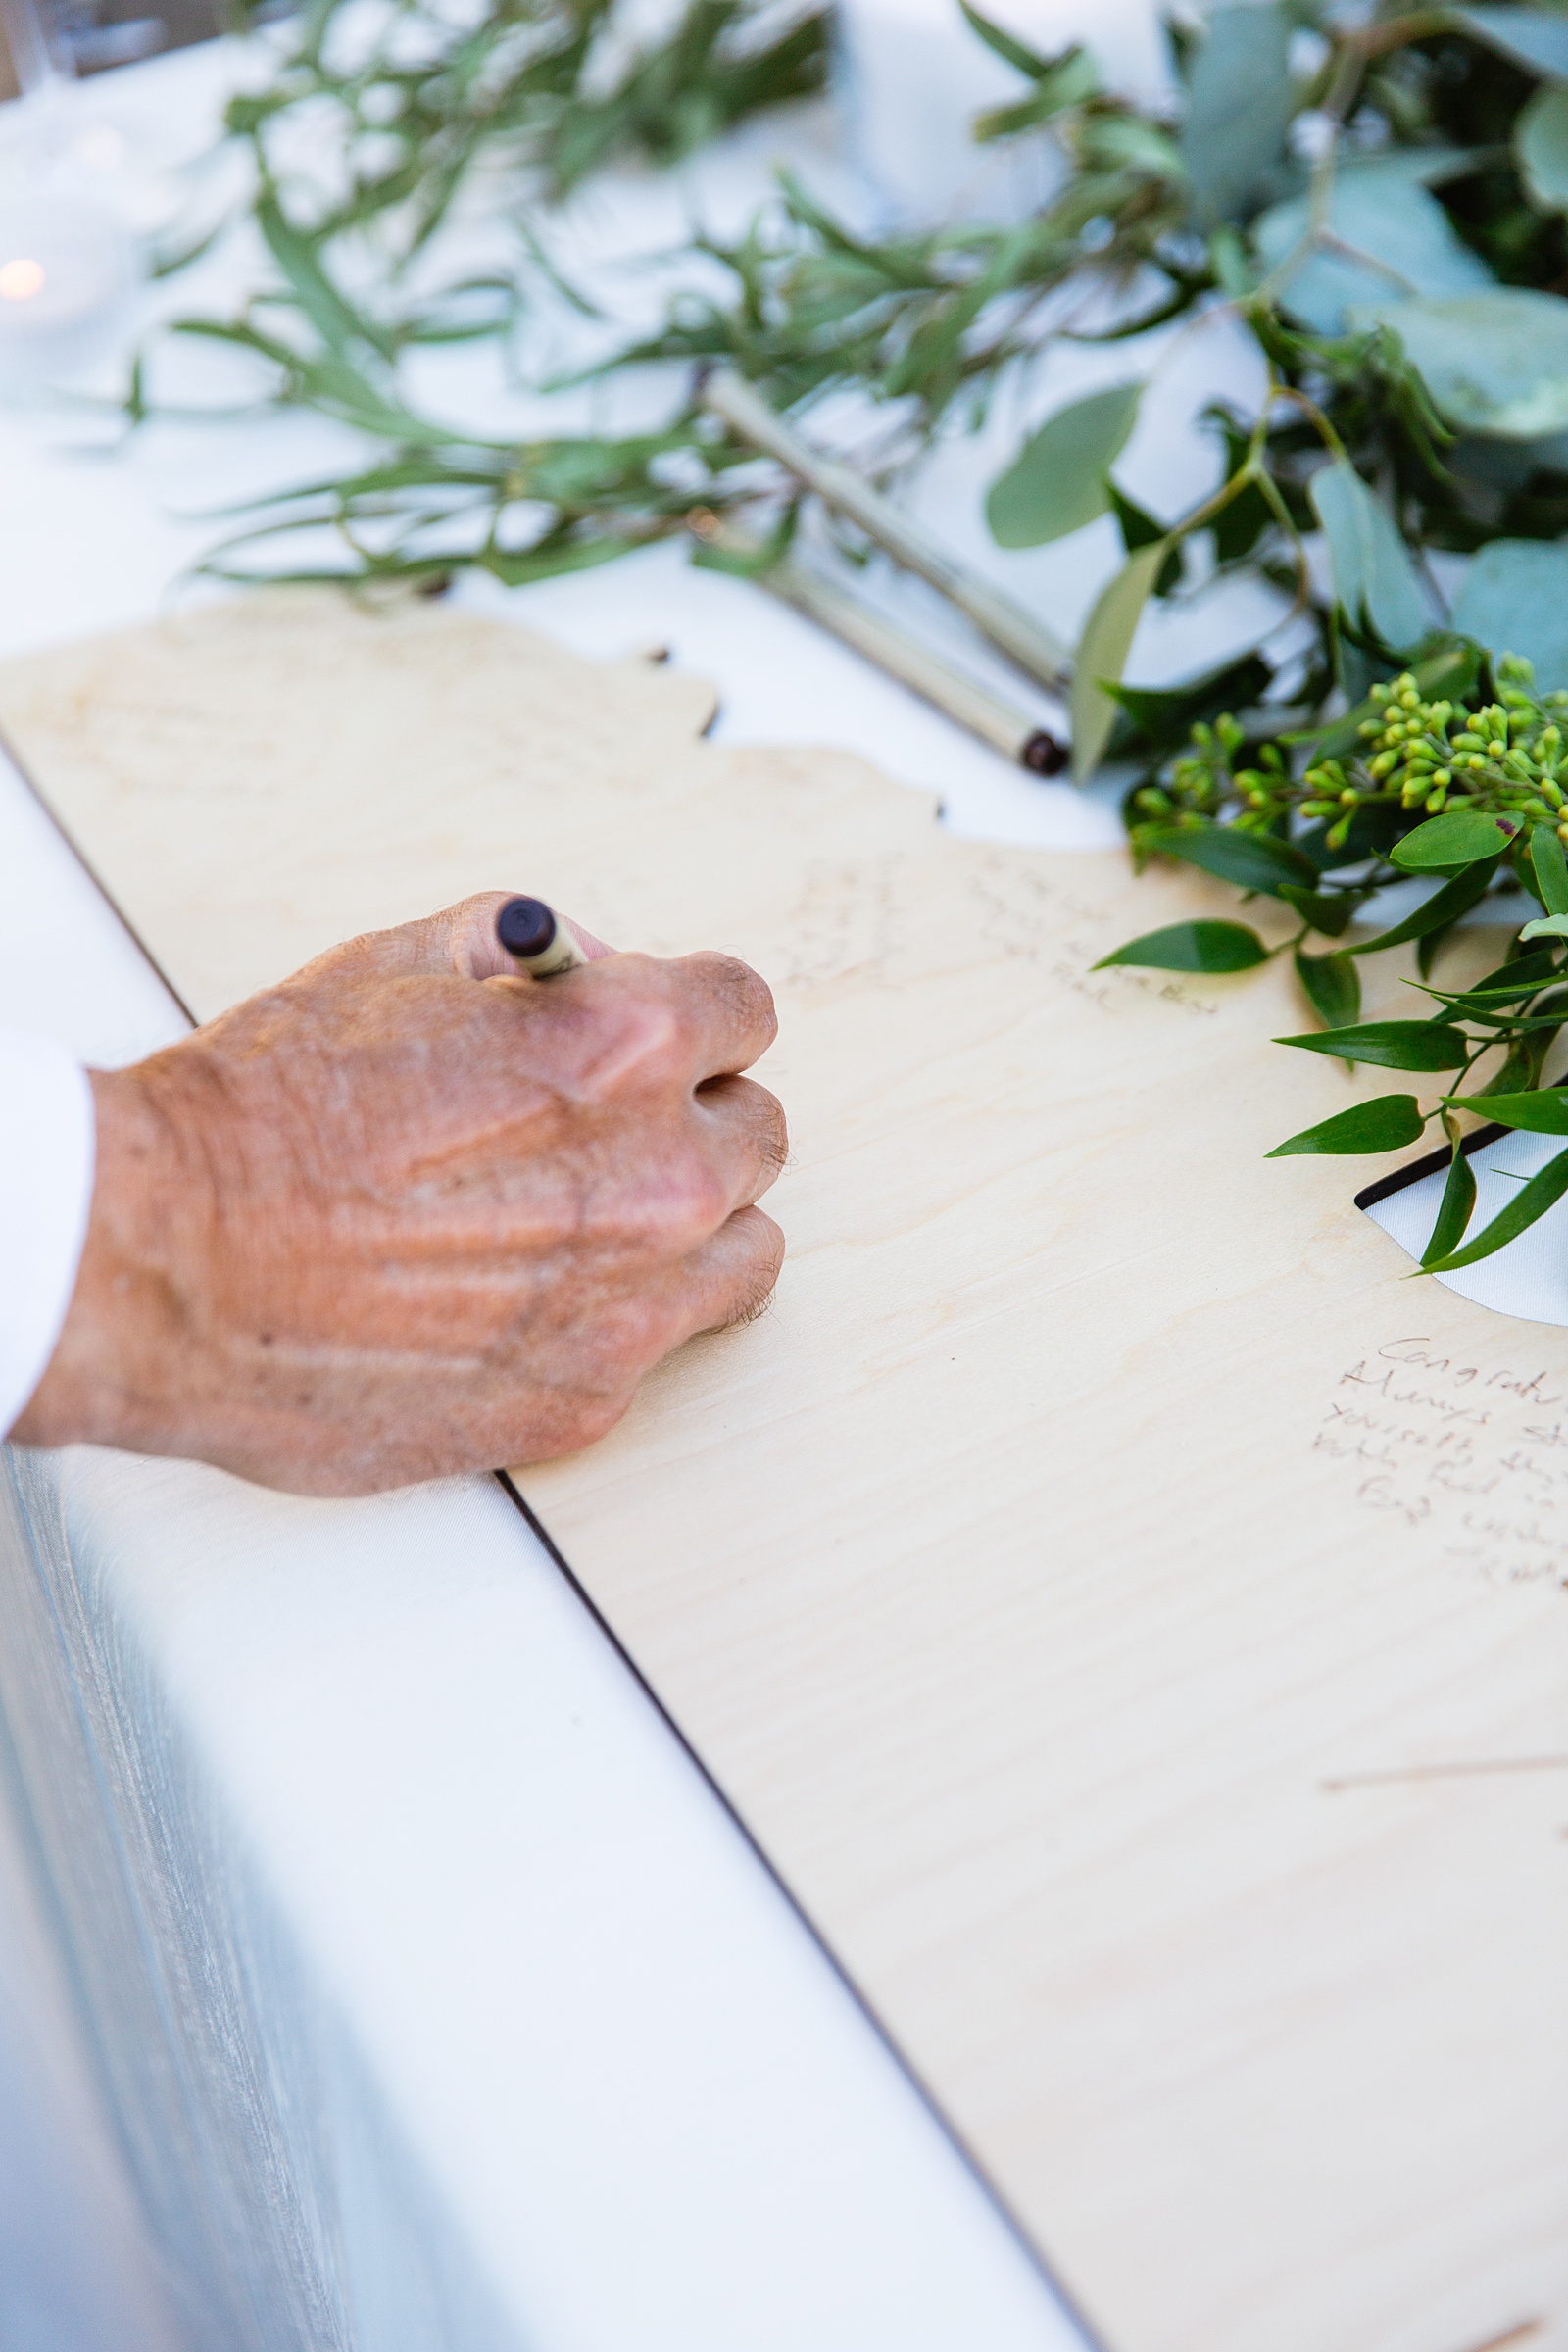 Wedding ceremony non-traditional guest book at Sanctuary at Camelback by Phoenix wedding photographer Juniper and Co Photography.